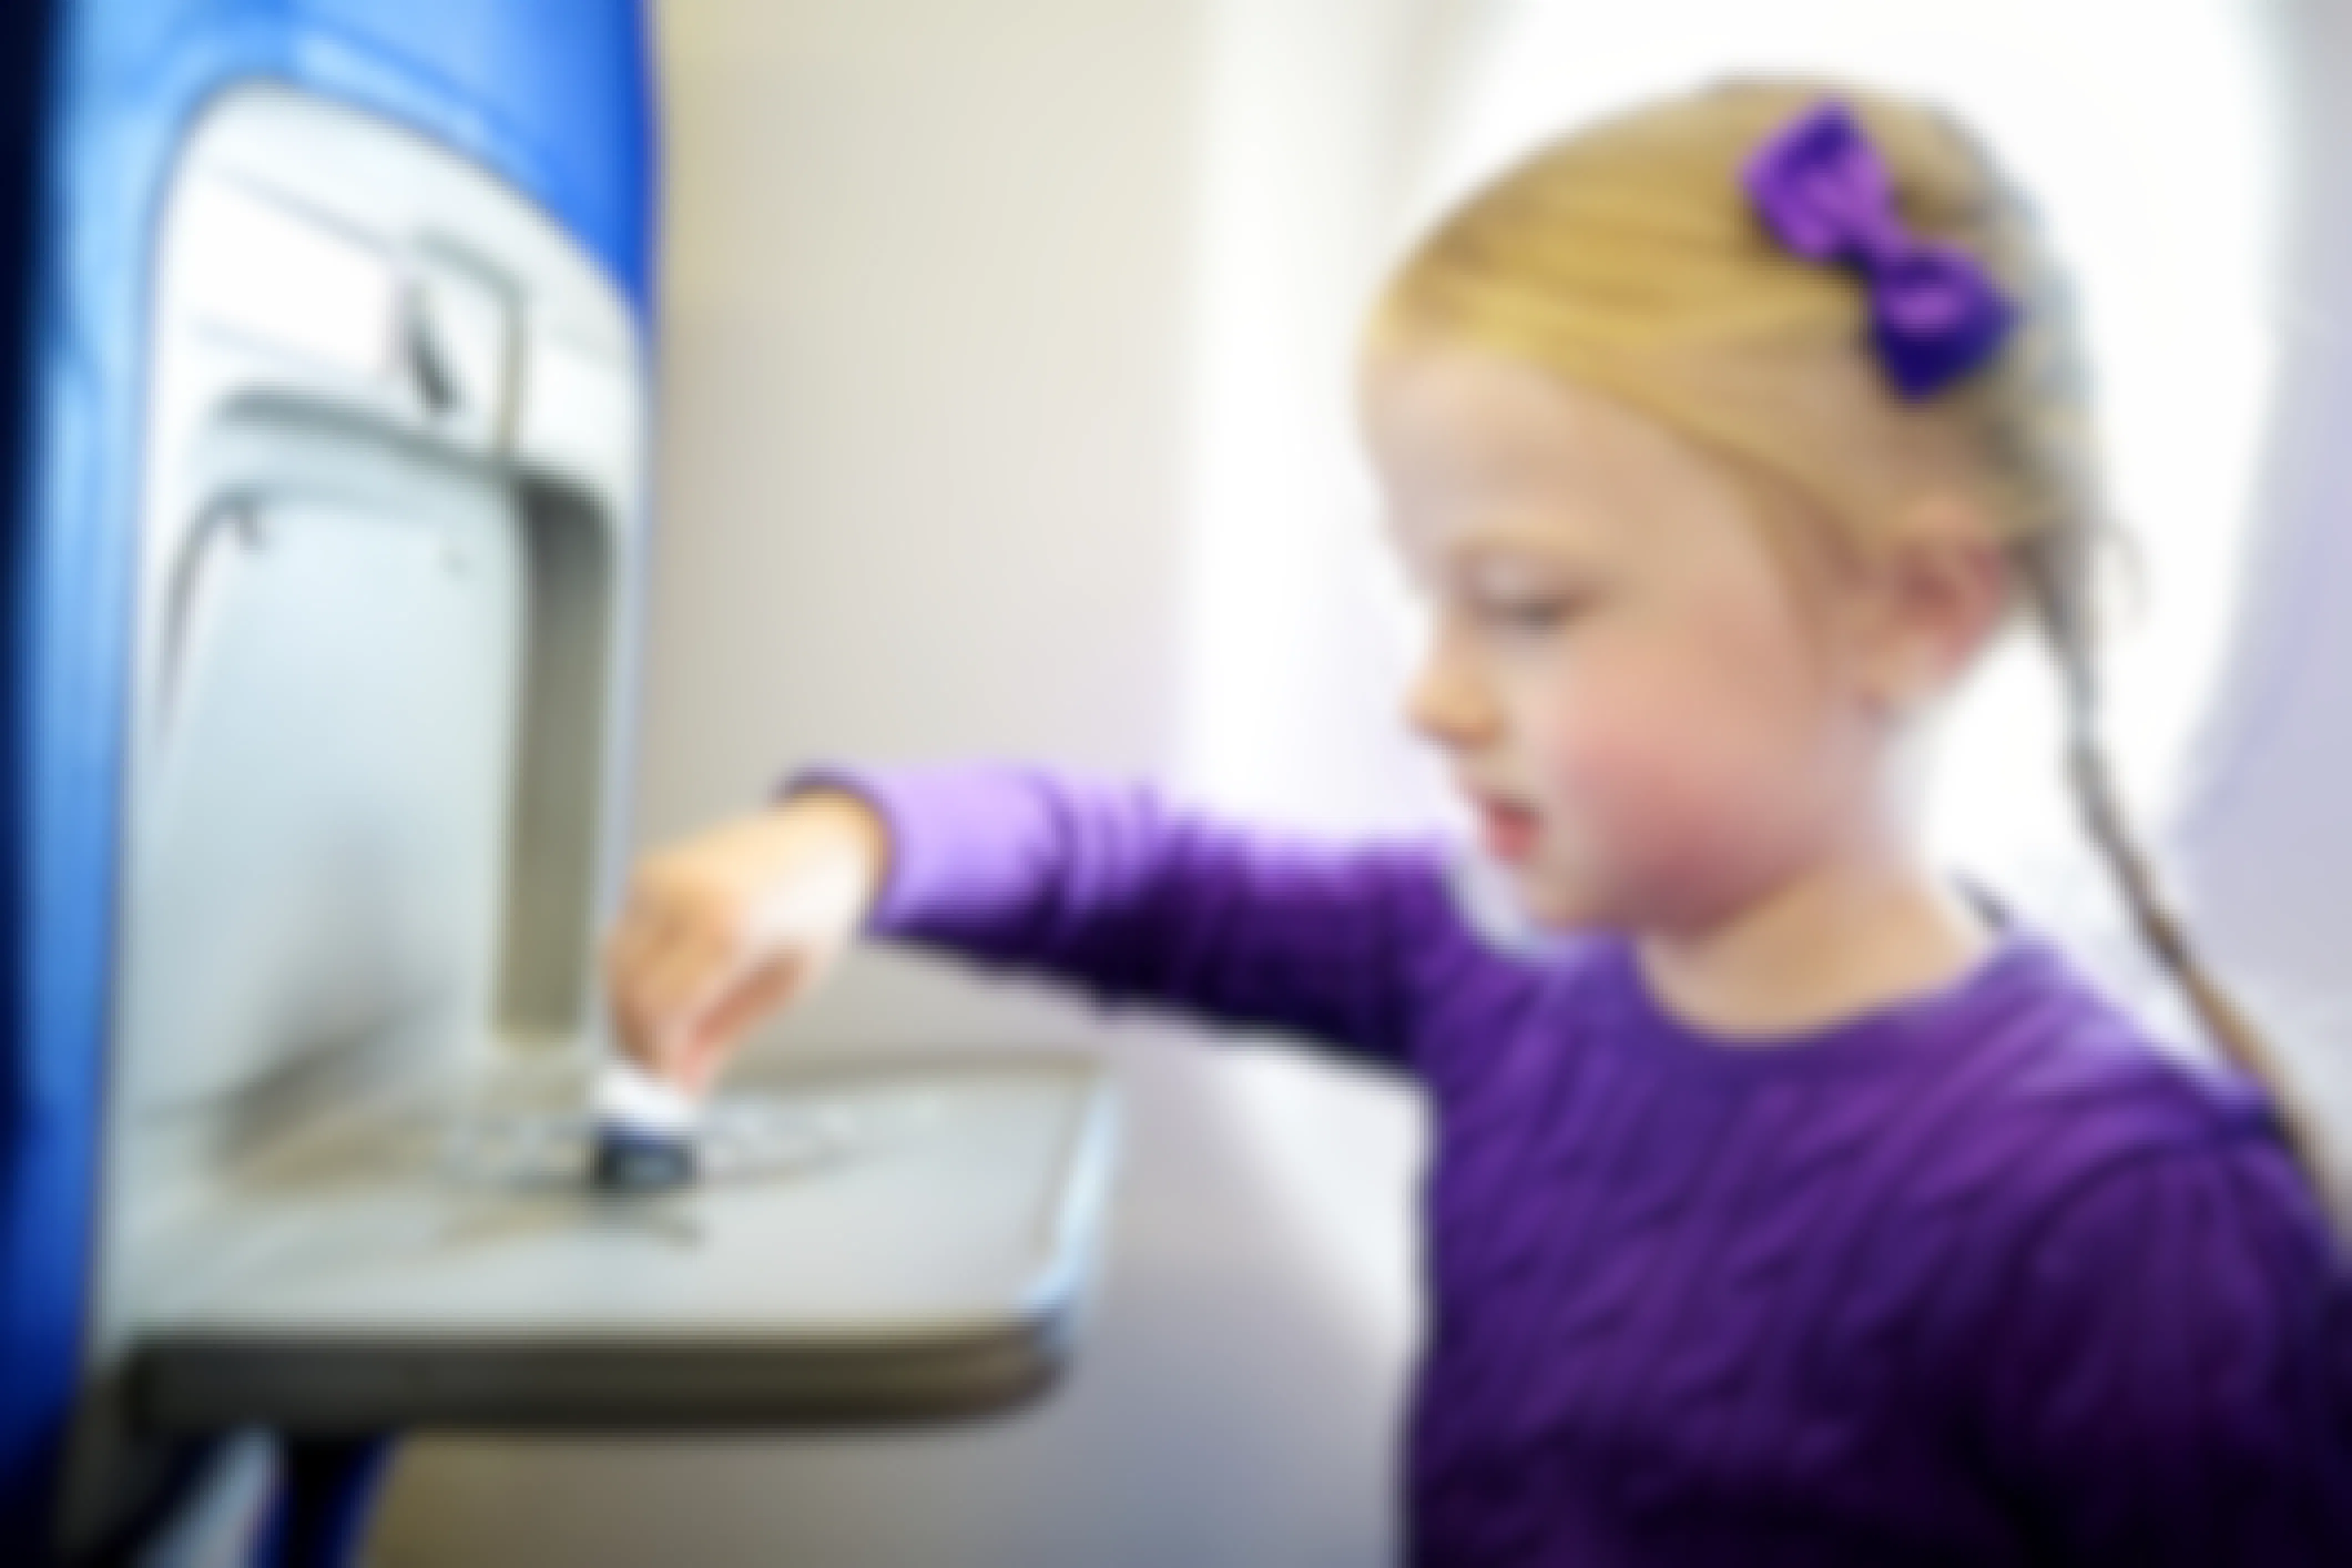 little girl sitting on a plane playing with a toy plane on the tray table